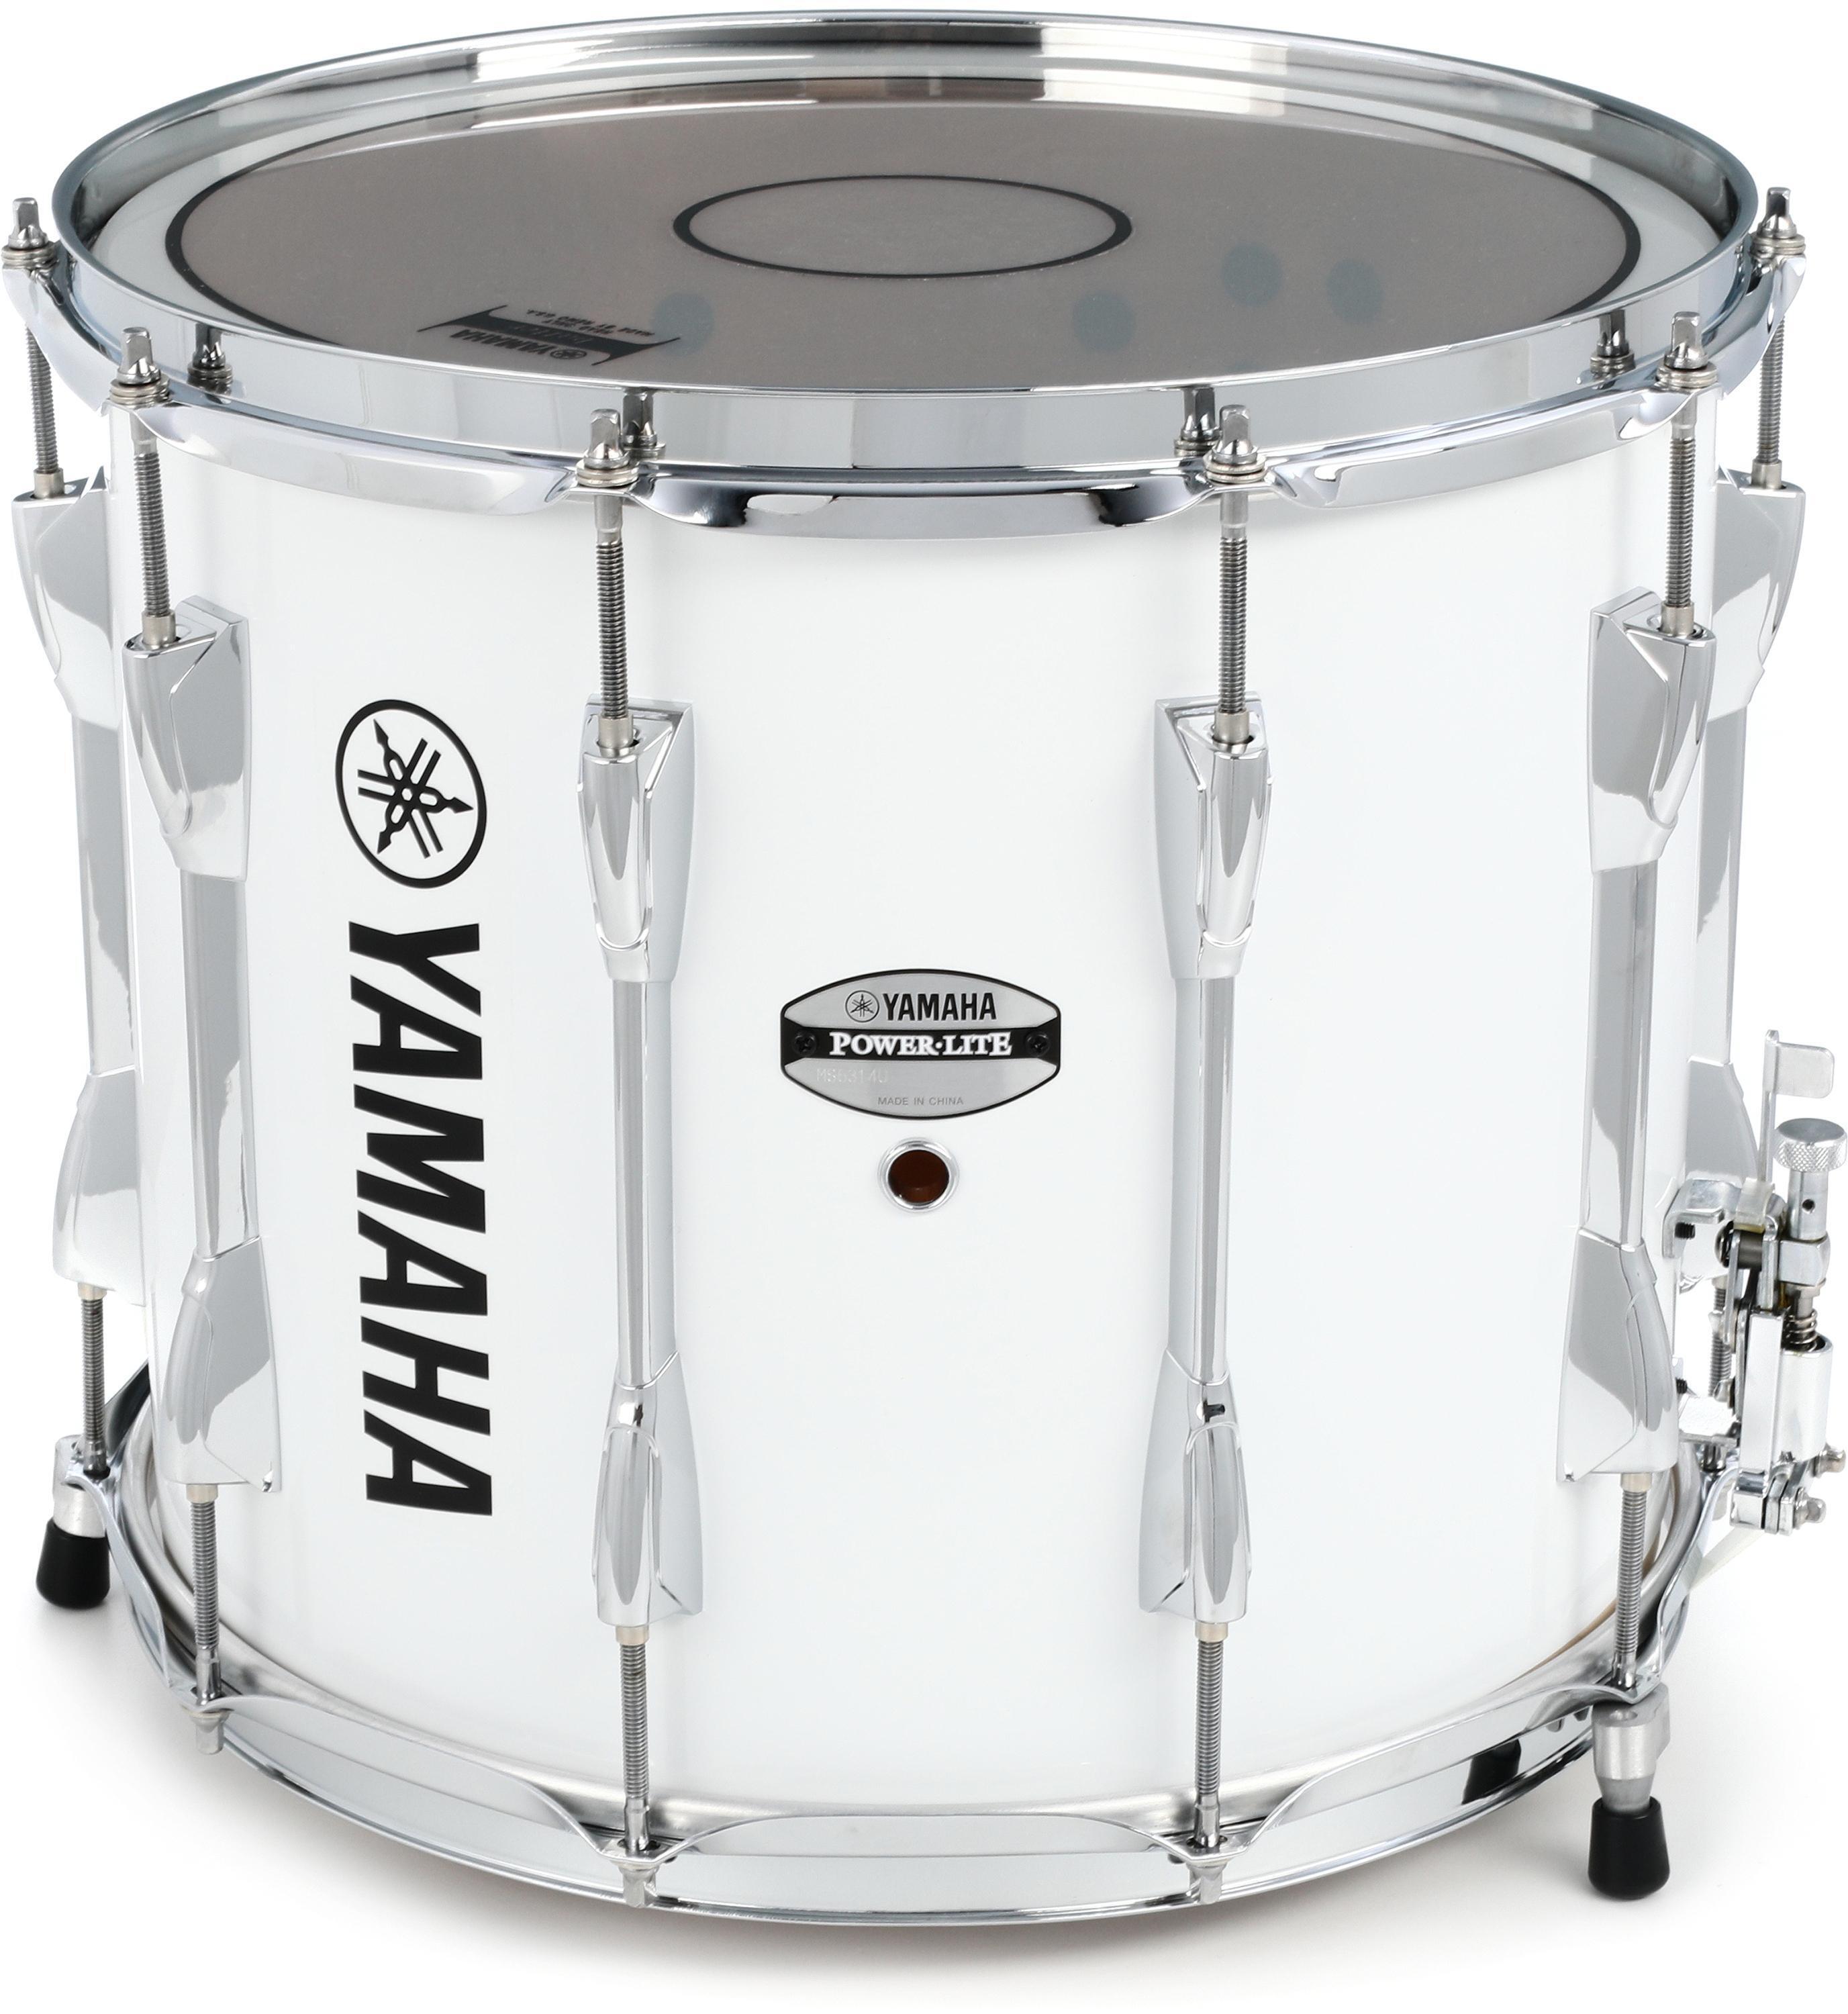 Yamaha MS-6300 Power-Lite Marching Snare Drum - 14-inch x 12-inch - White